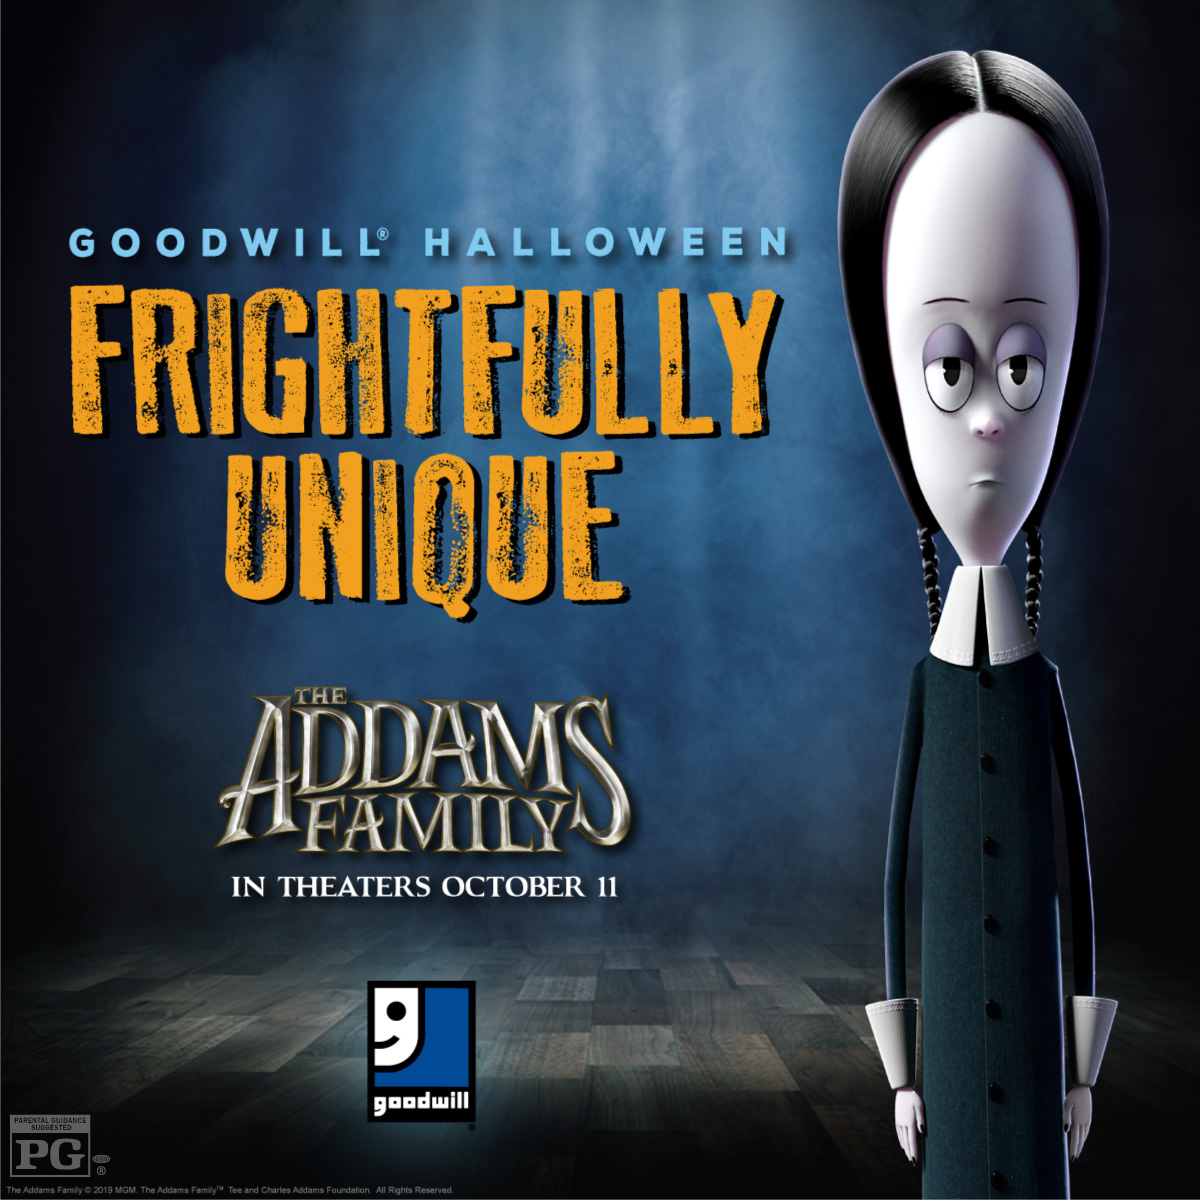 Goodwill® and The Addams Family Offer Creepy Inspiration, Costumes